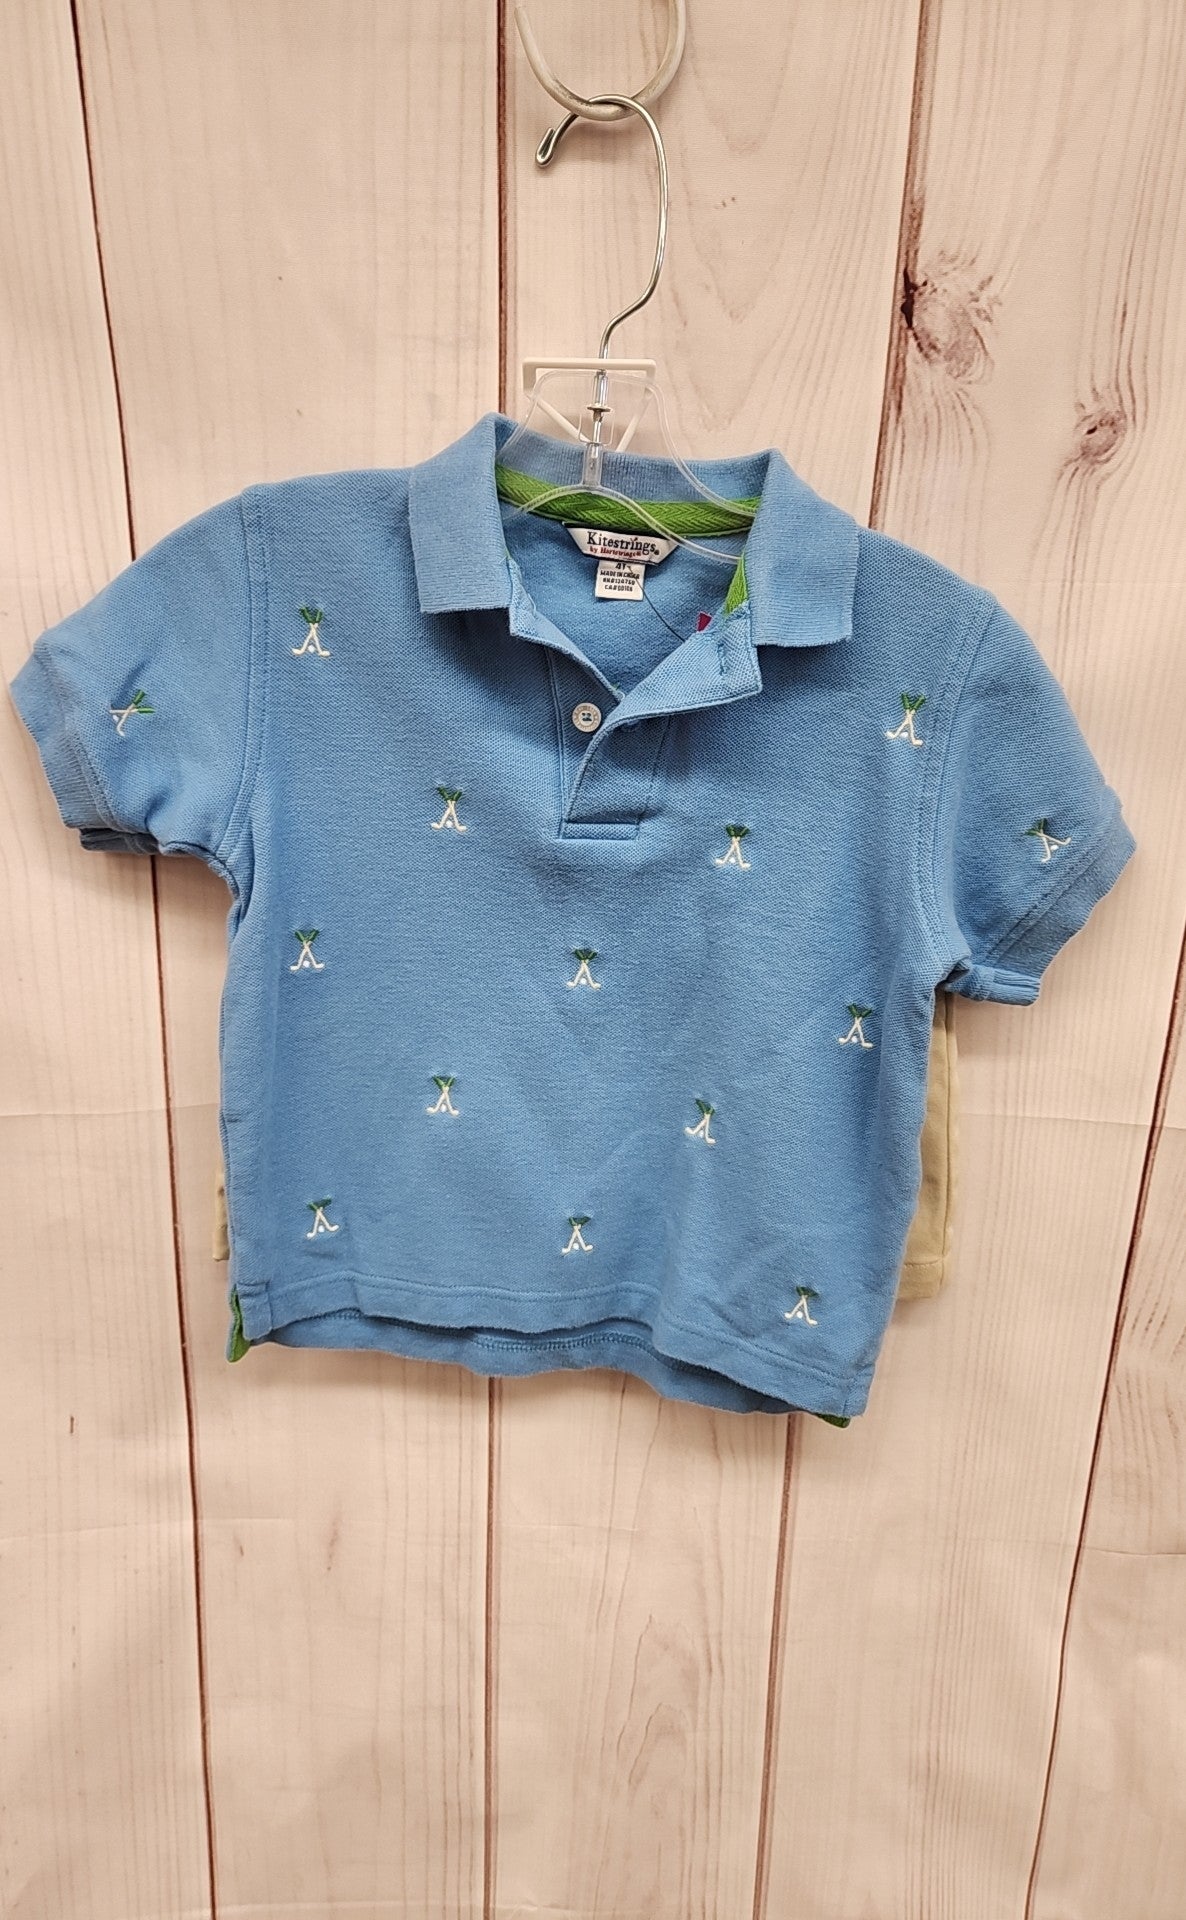 Kitestrings Boy's Size 4 Blue Outfit